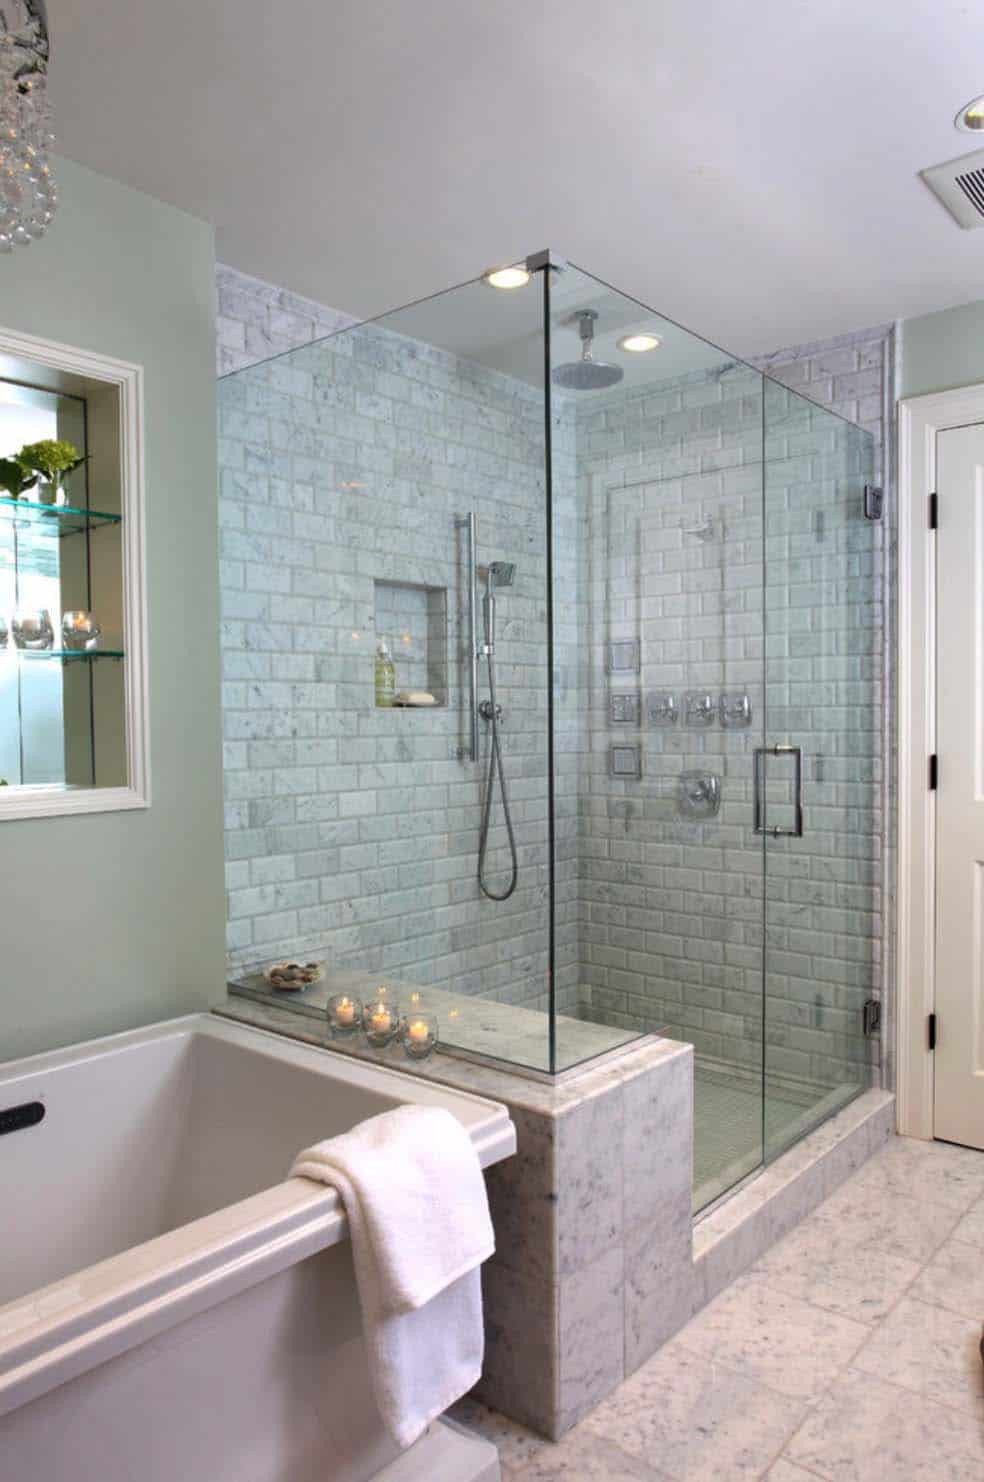 Bathroom Layouts With Shower
 53 Most fabulous traditional style bathroom designs ever